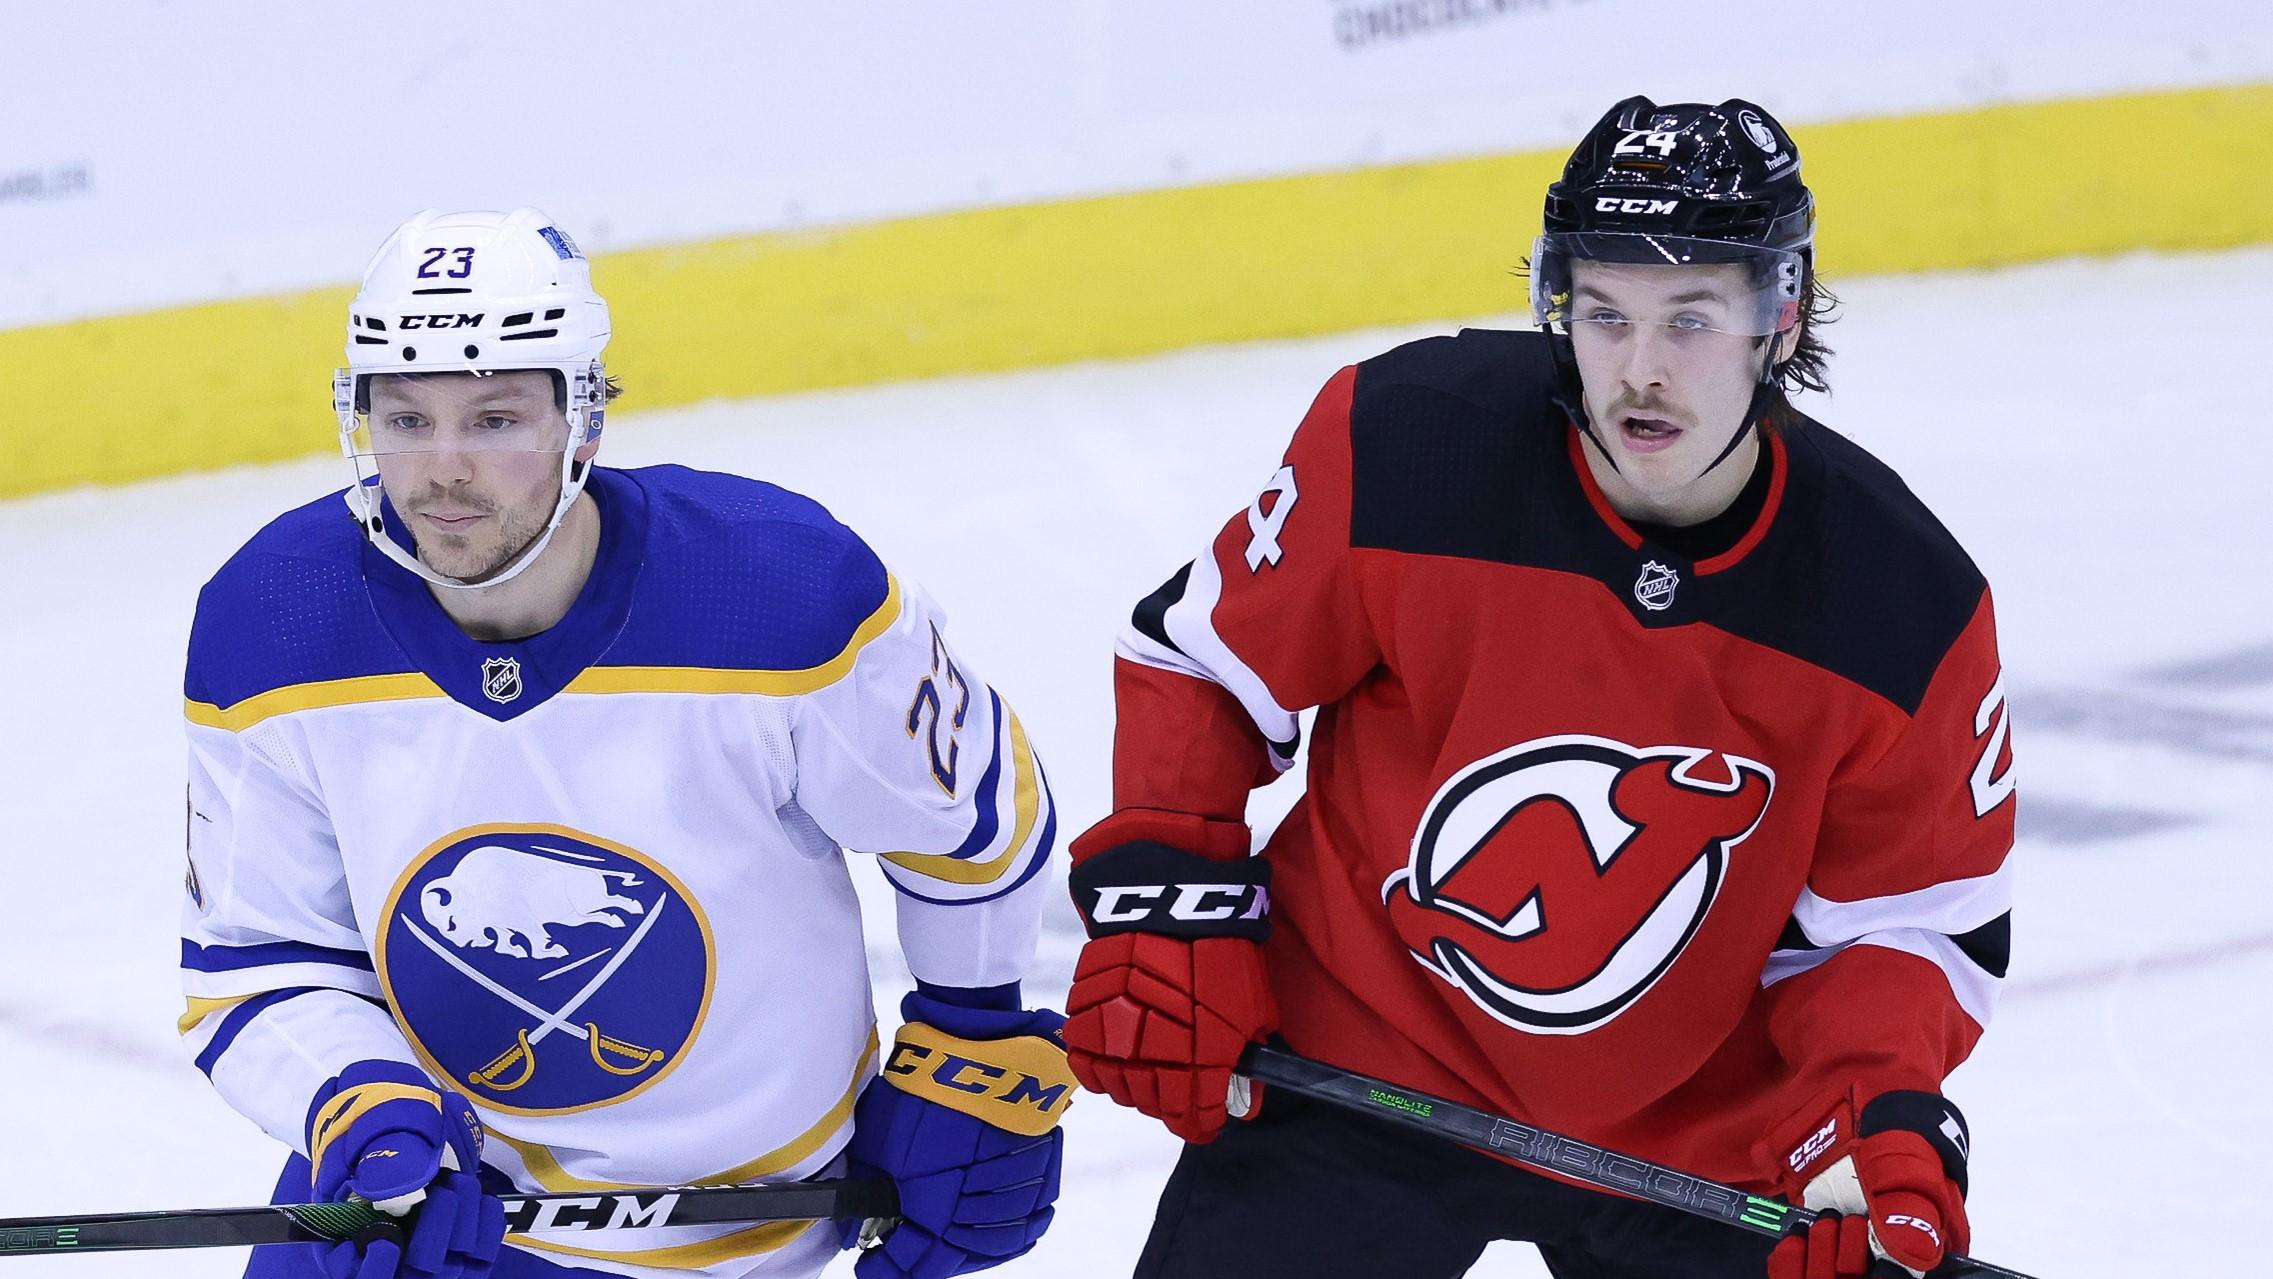 Buffalo Sabres center Sam Reinhart (23) battles for positions against New Jersey Devils defenseman Ty Smith (24) during the second period at Prudential Center. / Vincent Carchietta